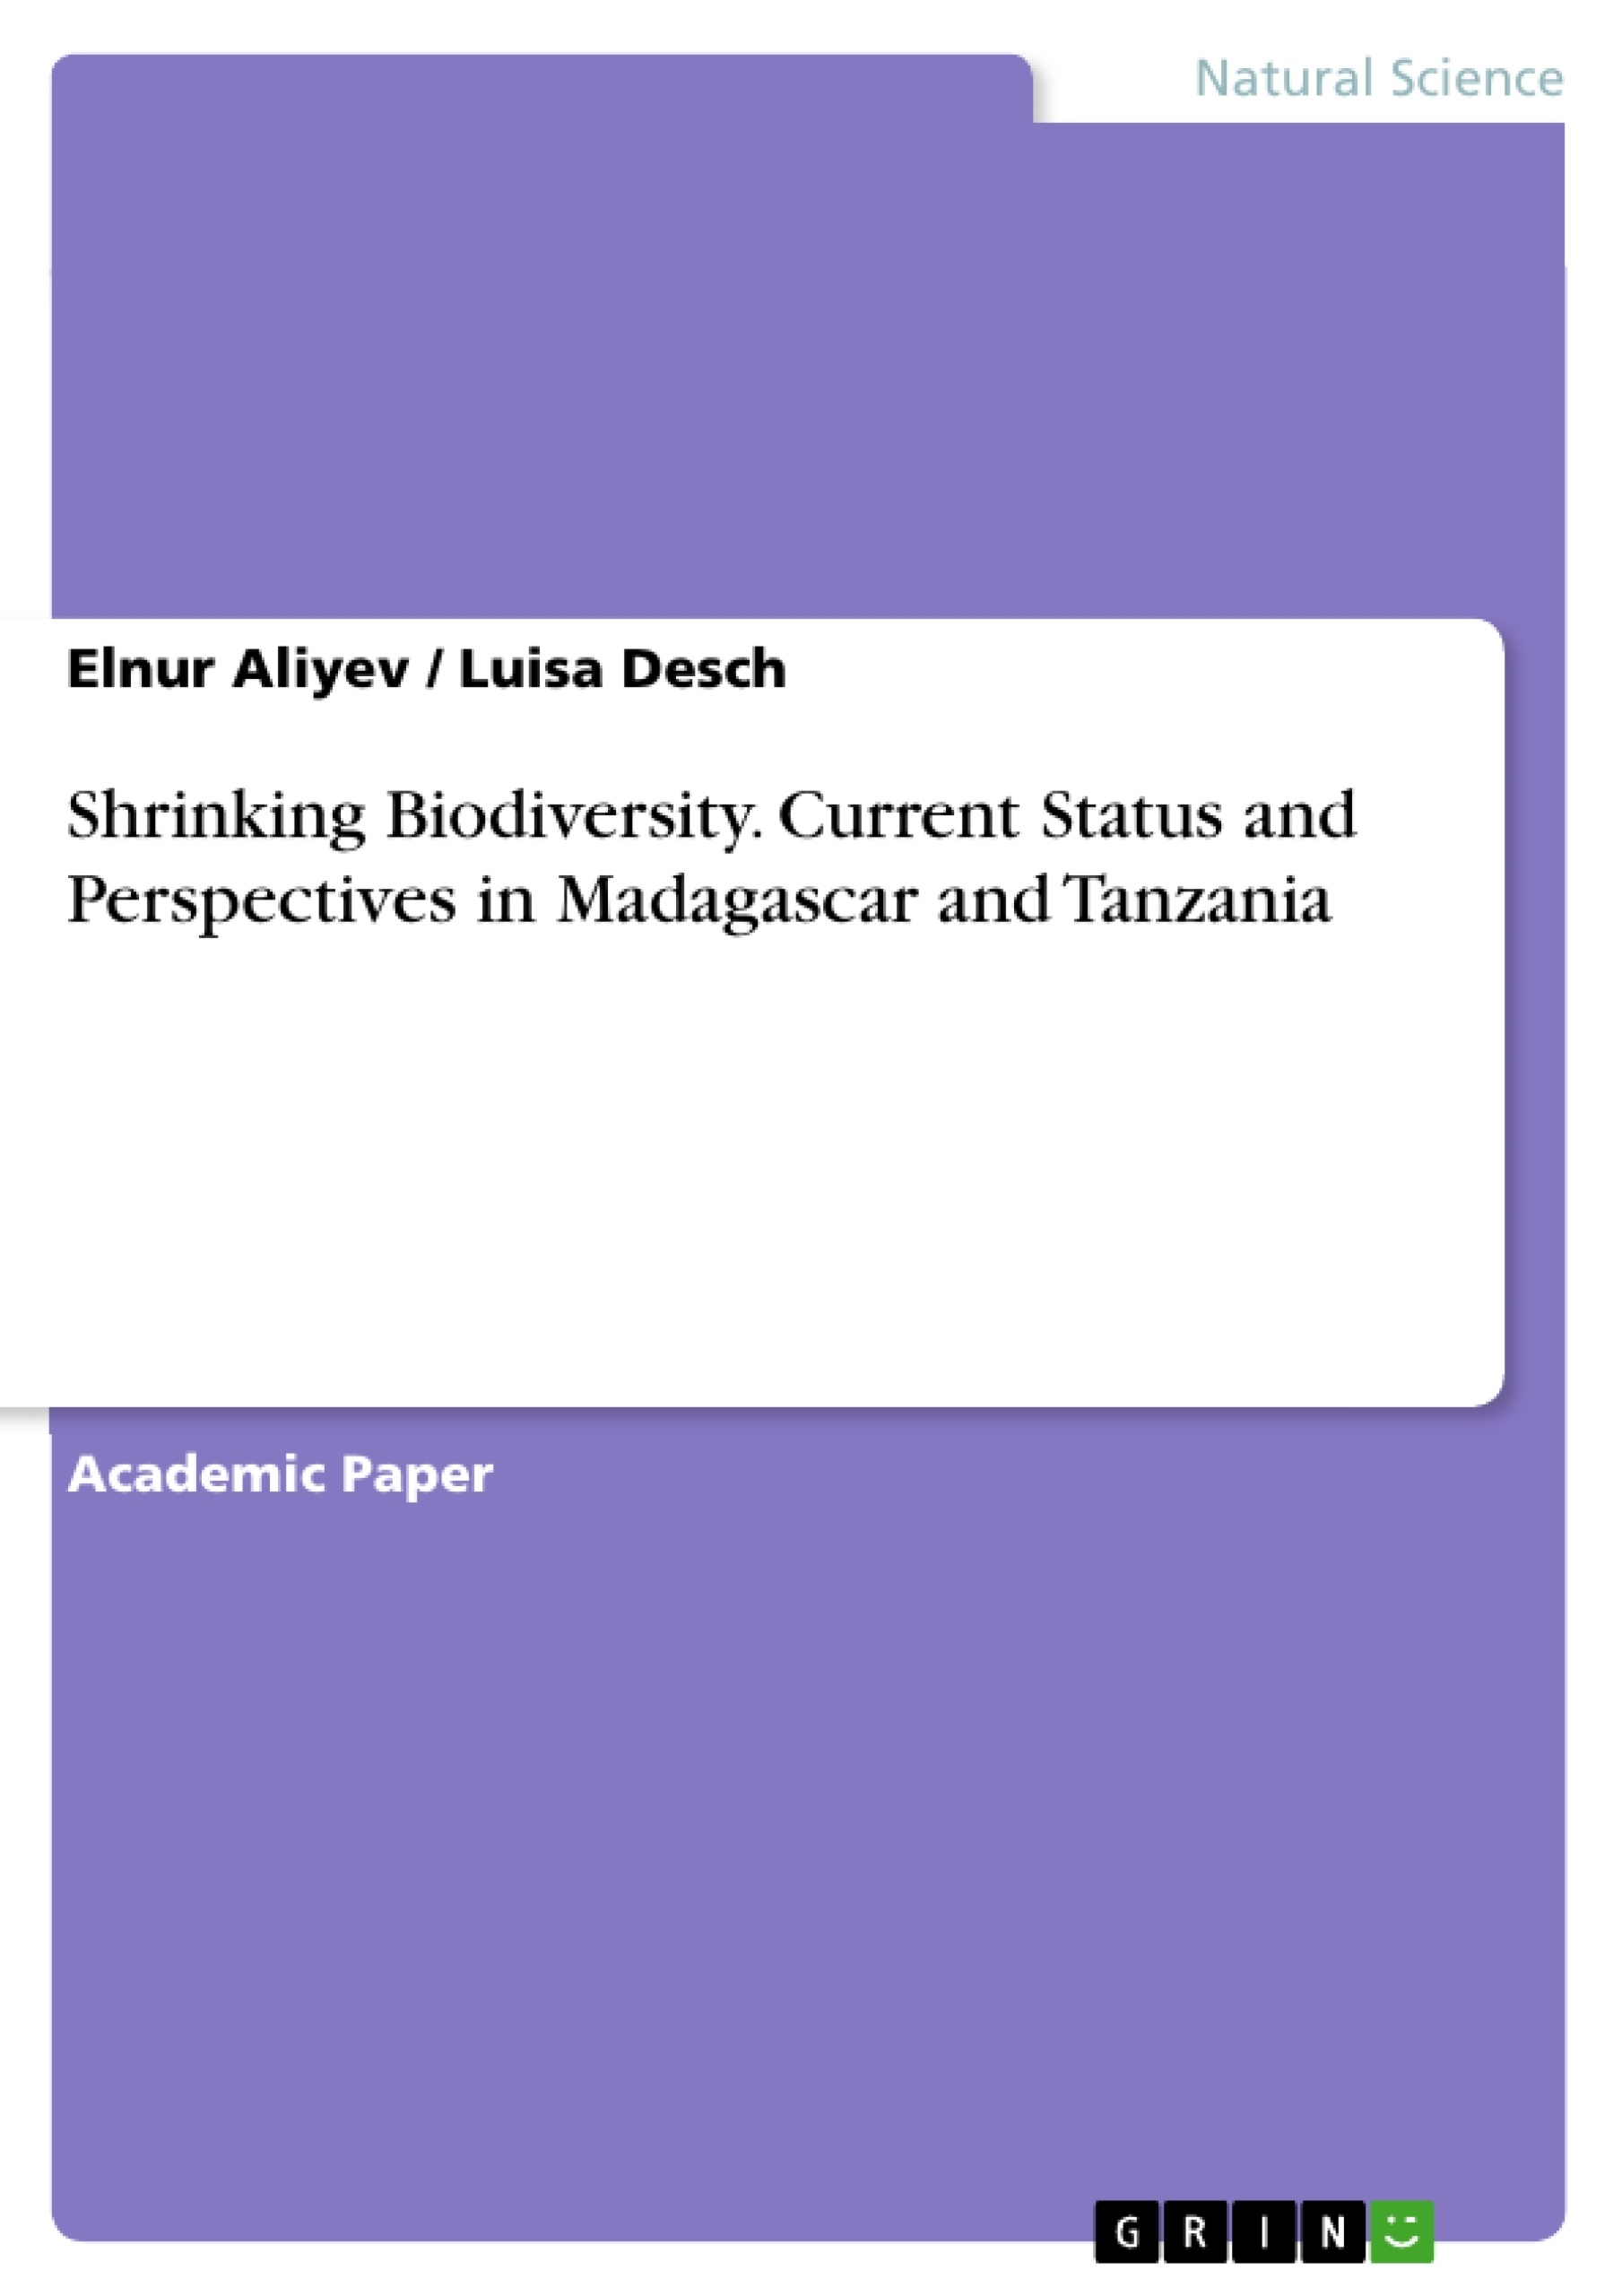 Titel: Shrinking Biodiversity. Current Status and Perspectives in Madagascar and Tanzania